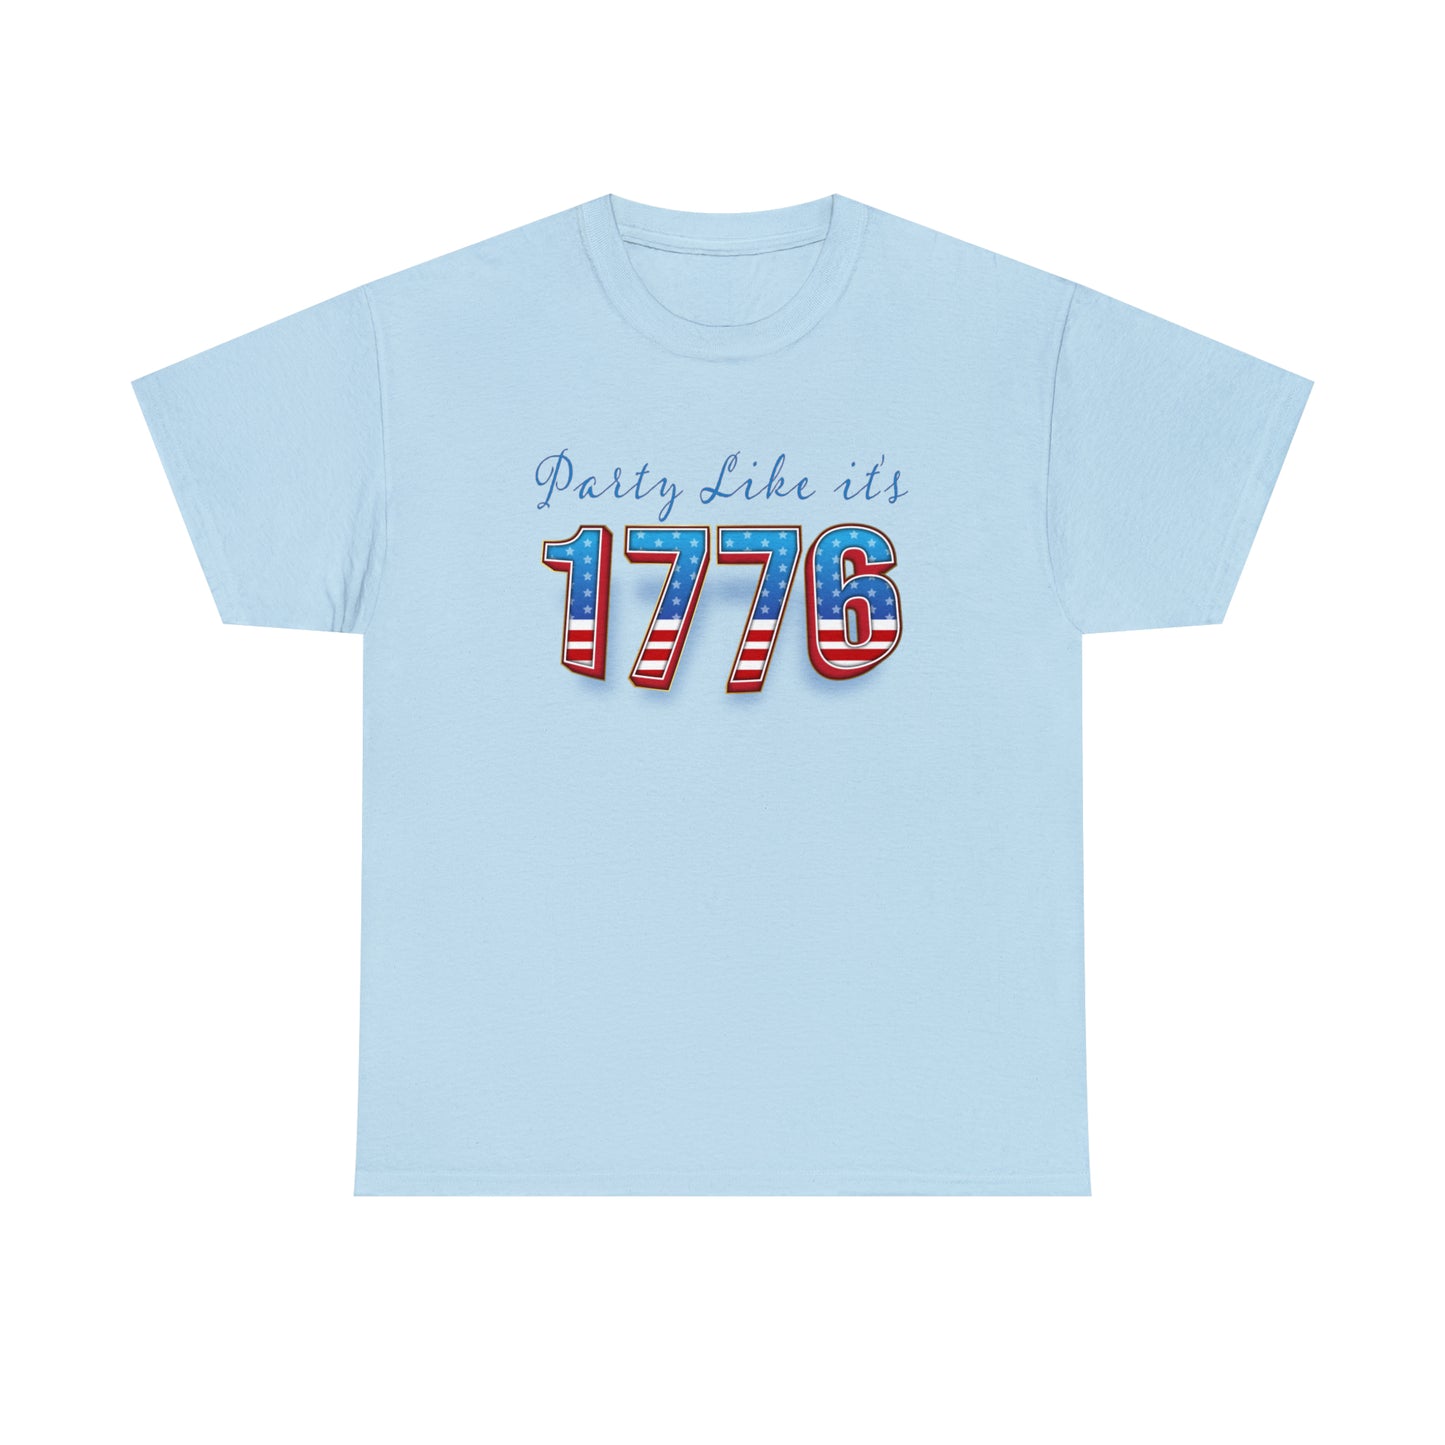 Independence Day T-Shirt For Fourth Of July TShirt For American Shirt For Patriot USA Celebration Shirt Patriotic T Shirt For July 4th T-Shirt